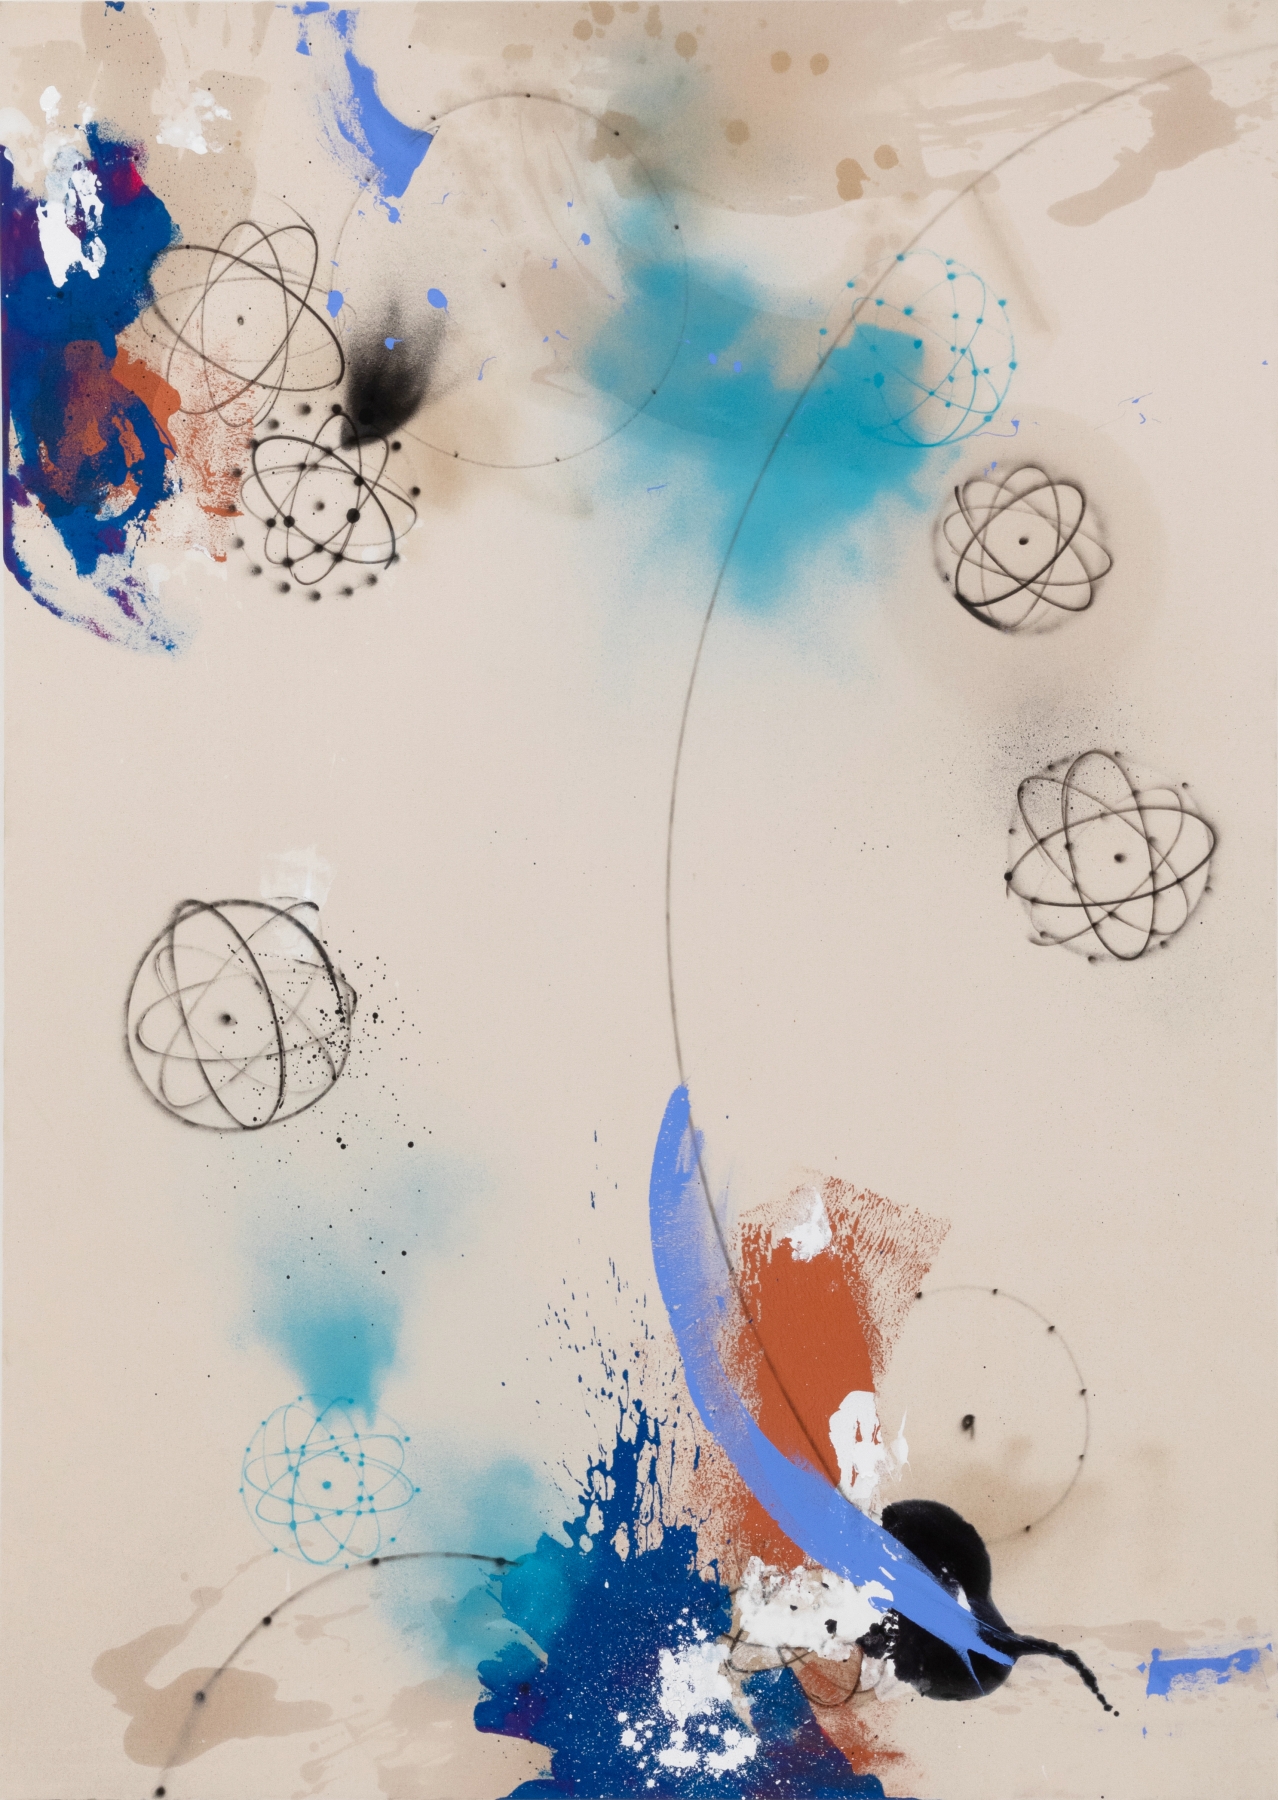 FUTURA2000 | PLUTO |&amp;nbsp;2020 |spray paint, acrylic, varnish, oil and ink on canvas |84h x 60w in
&amp;nbsp;